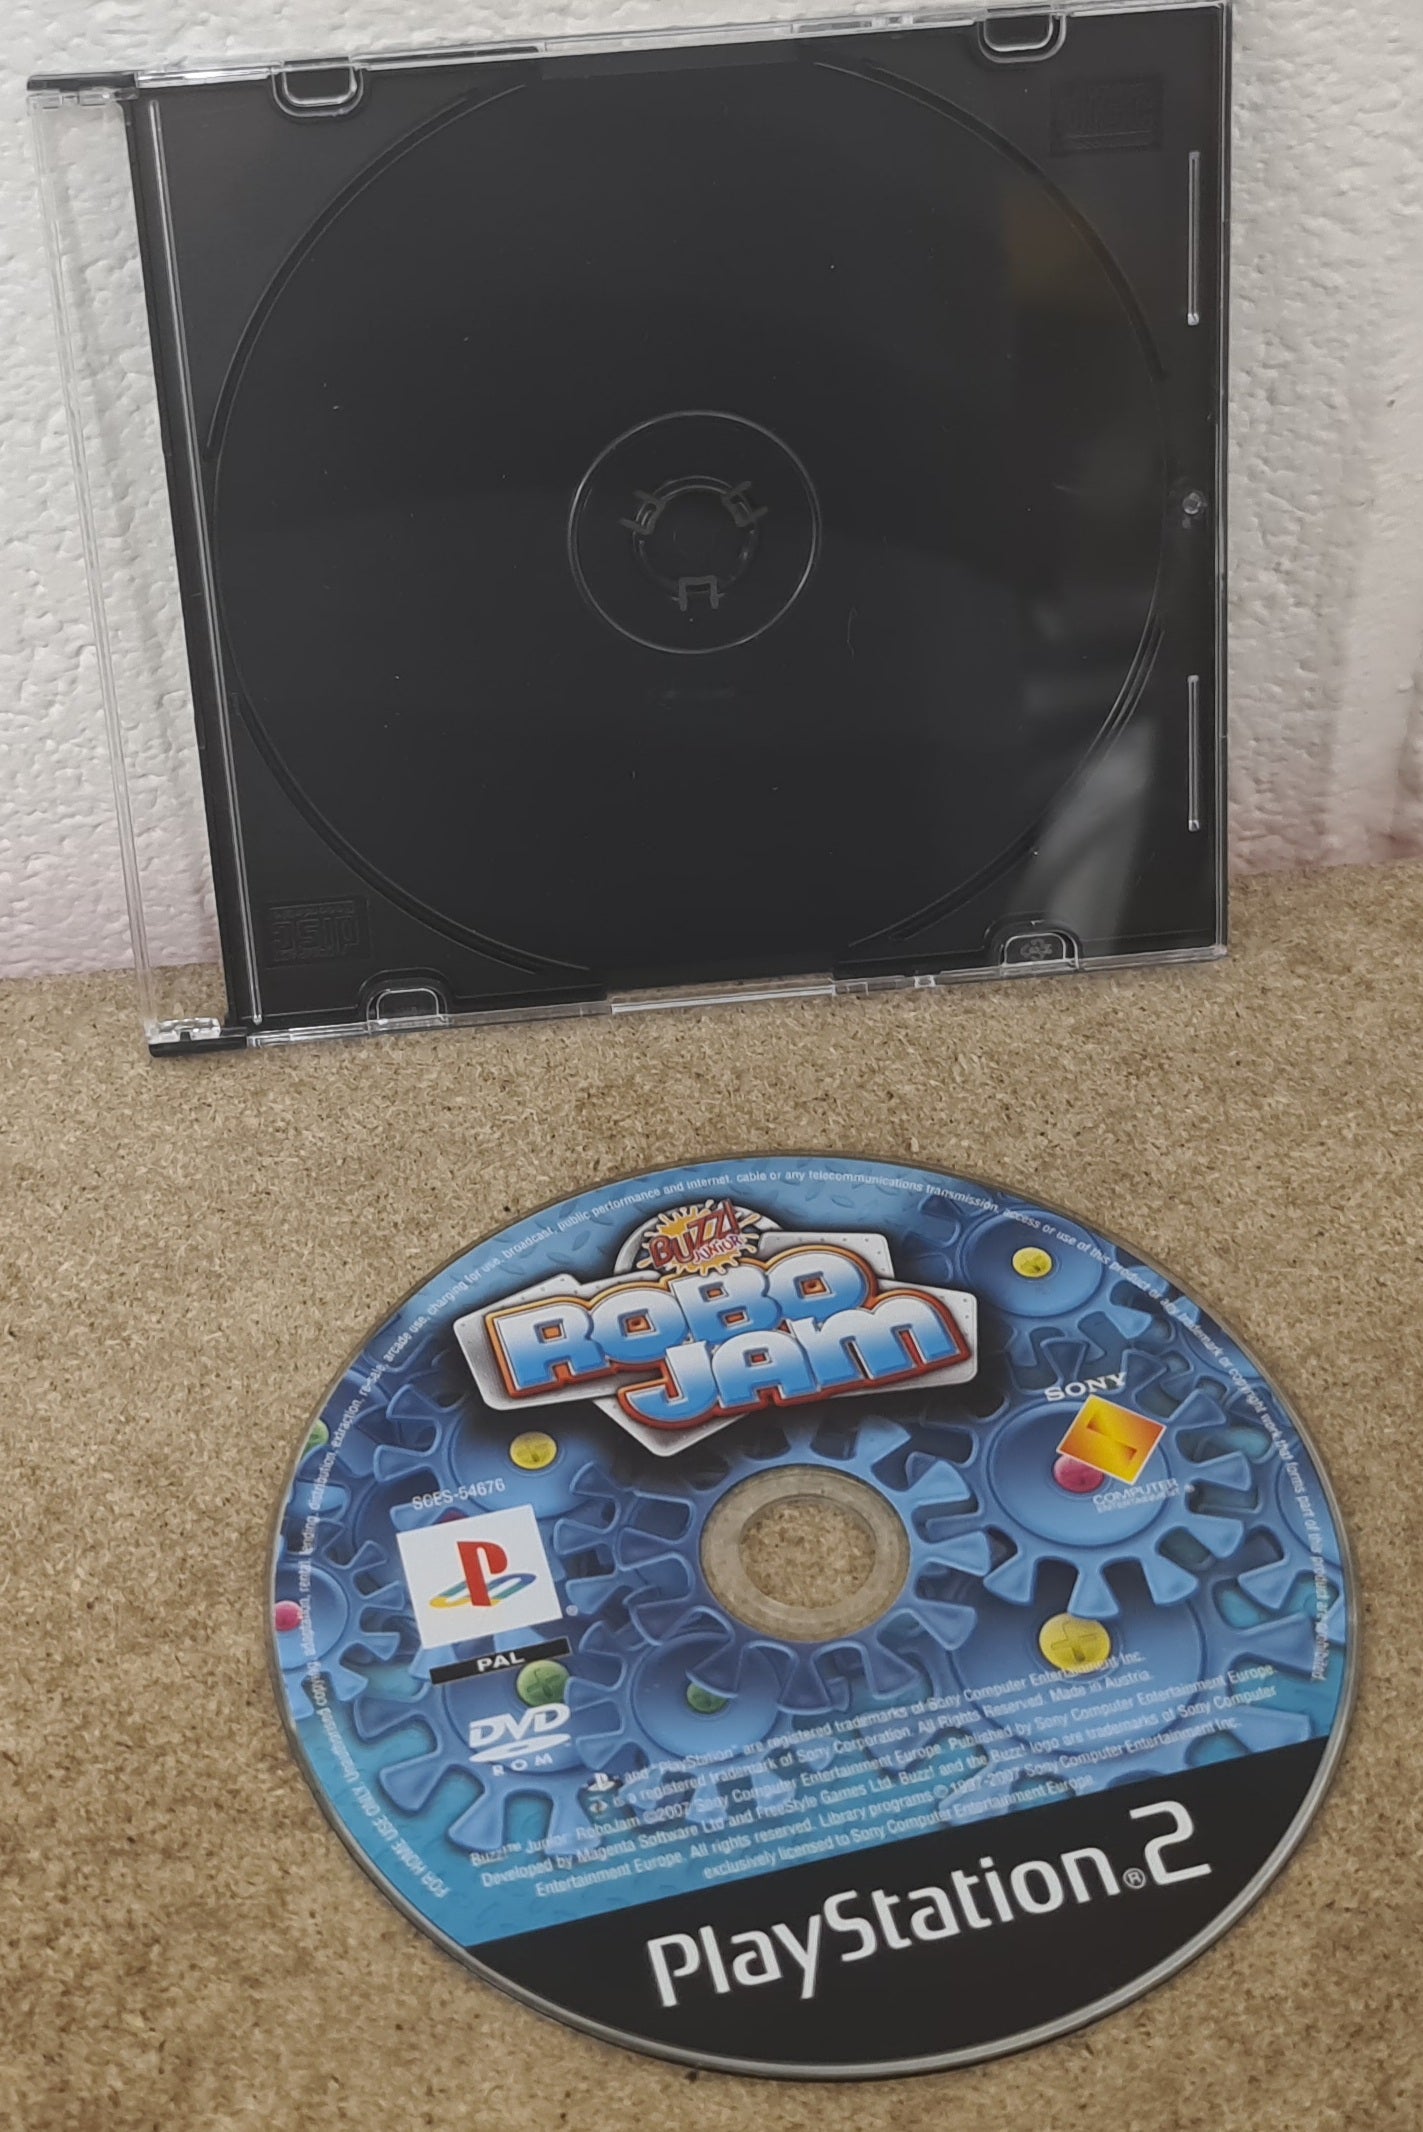 Buzz Junior Robojam Sony Playstation 2 (PS2) Game Disc Only